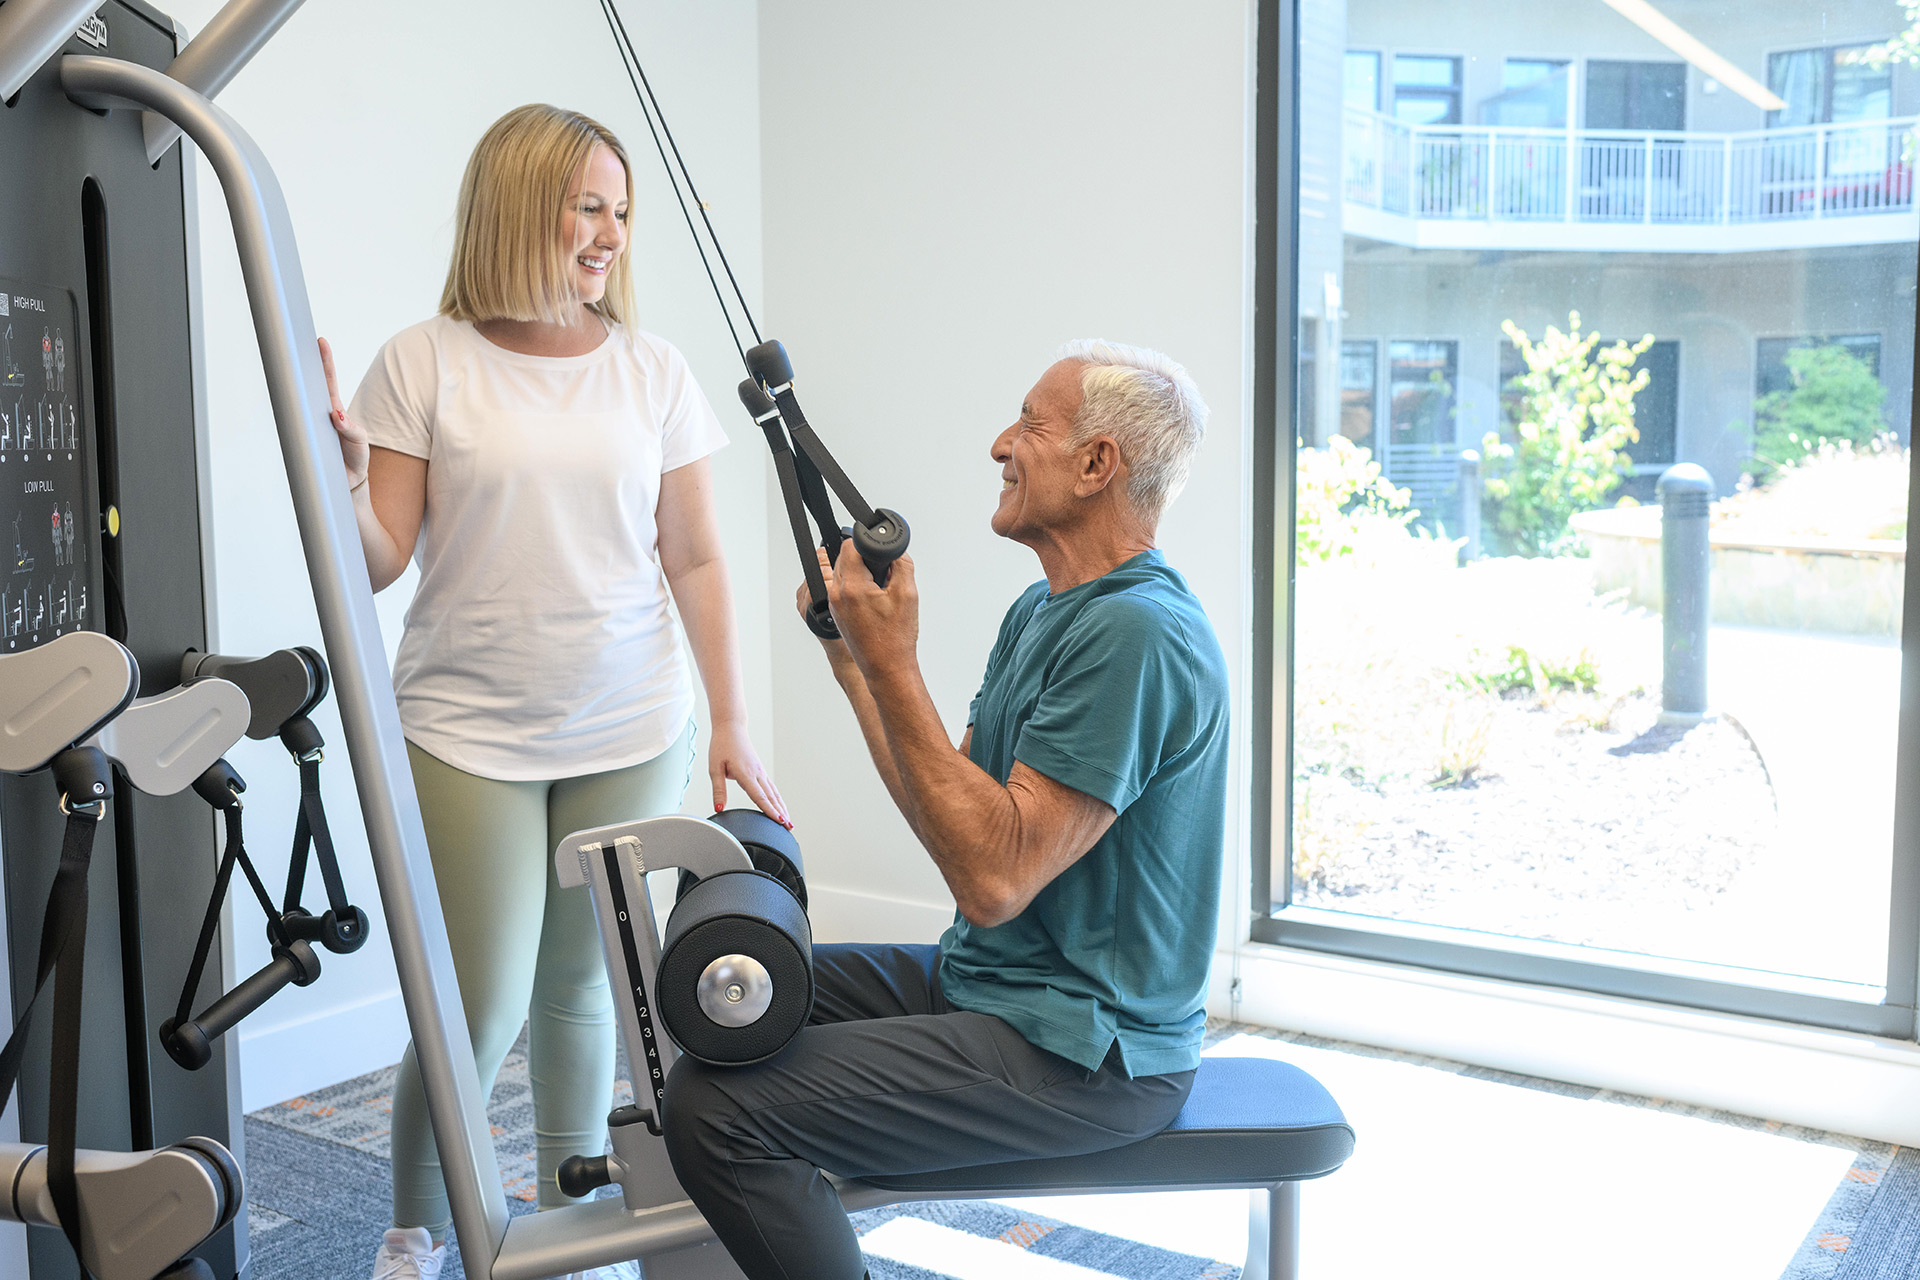 Residents enjoying the gym and fitness machines.